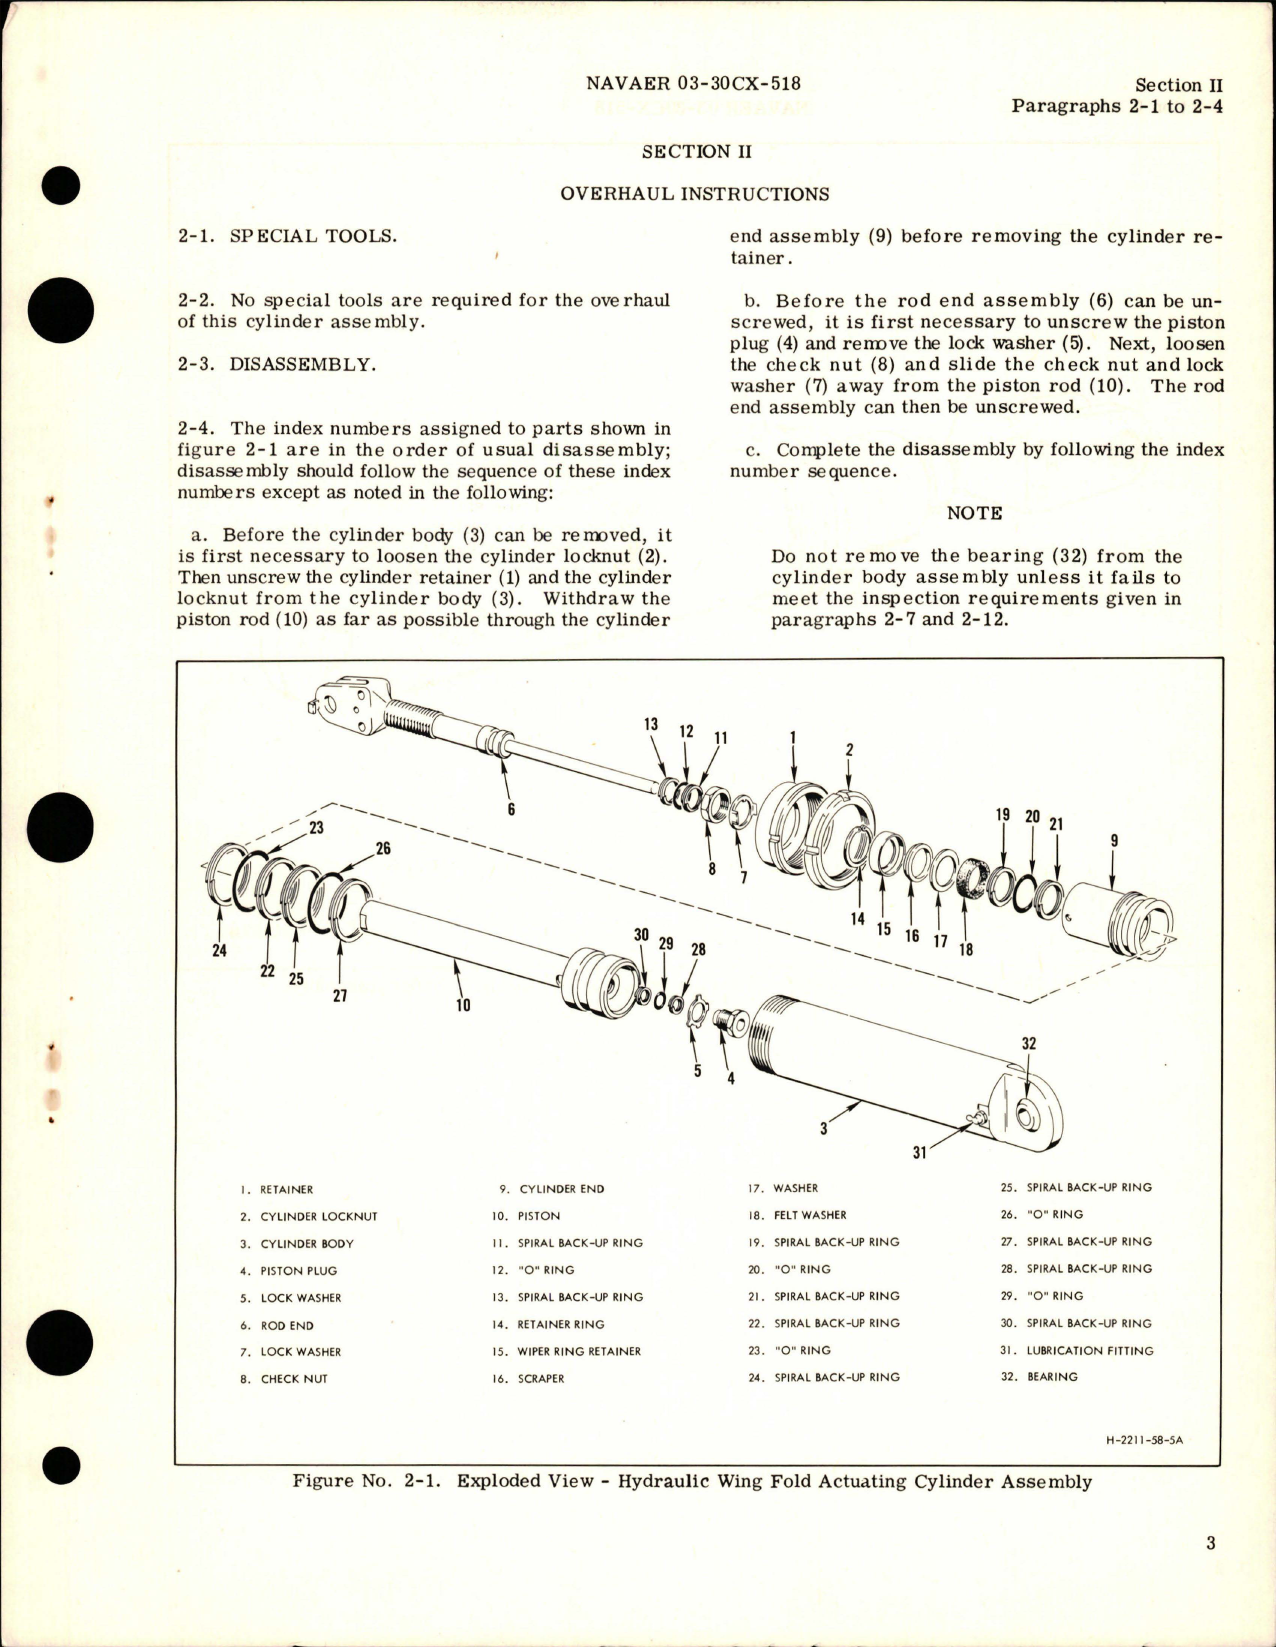 Sample page 5 from AirCorps Library document: Overhaul Instructions for Hydraulic Wing Fold Actuating Cylinder Assembly - Part 209-58030 